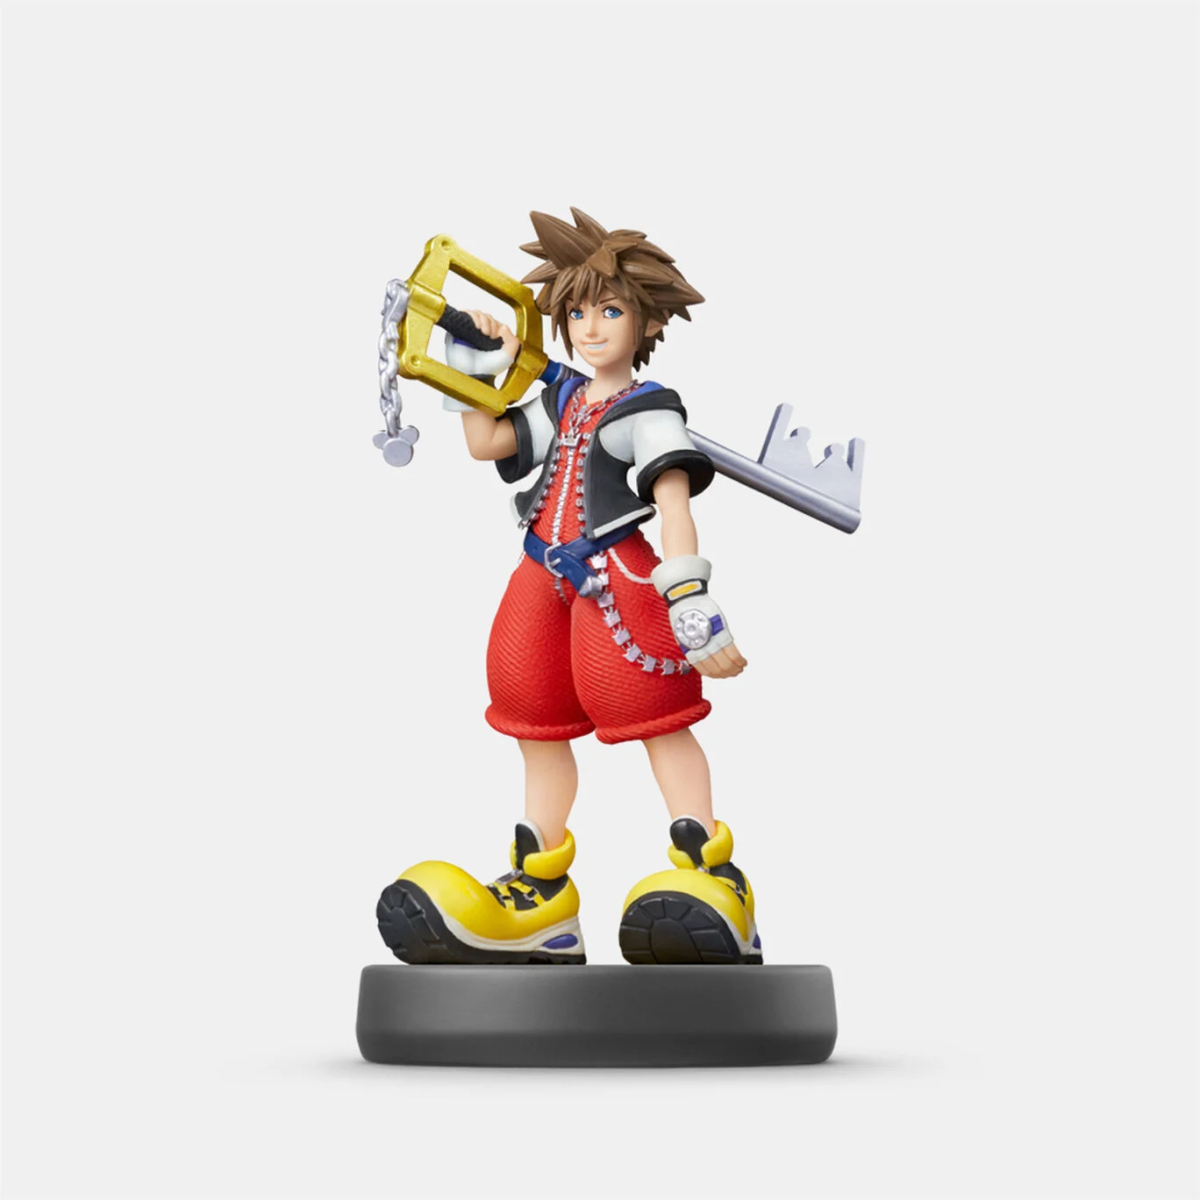 Sora's Smash Ultimate Amiibo Release Date Confirmed for February 16, 2024